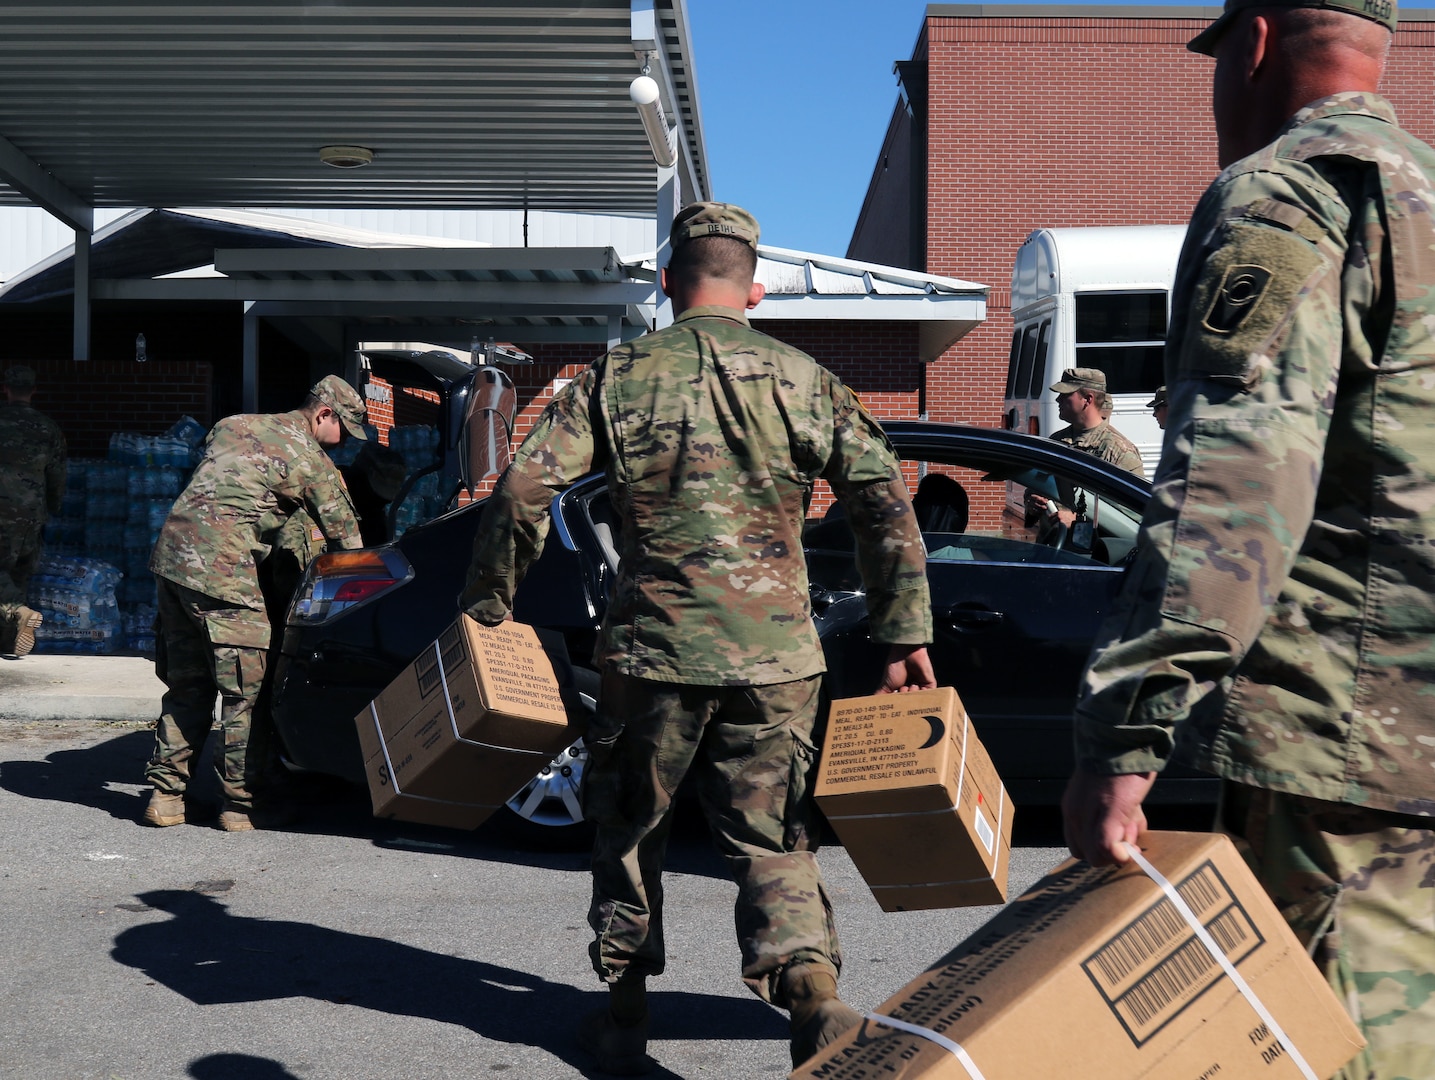 Florida National Guard Soldiers from the 53rd Infantry Brigade Combat Team, 2-124 Charlie Co., Ocala, Fla., load food in to a local citizen’s vehicle during Hurricane Michael disaster relief, Panama City, Fla., Oct. 13, 2018.  Soldiers respond in communities throughout the panhandle in conjunction with civilian emergency services.